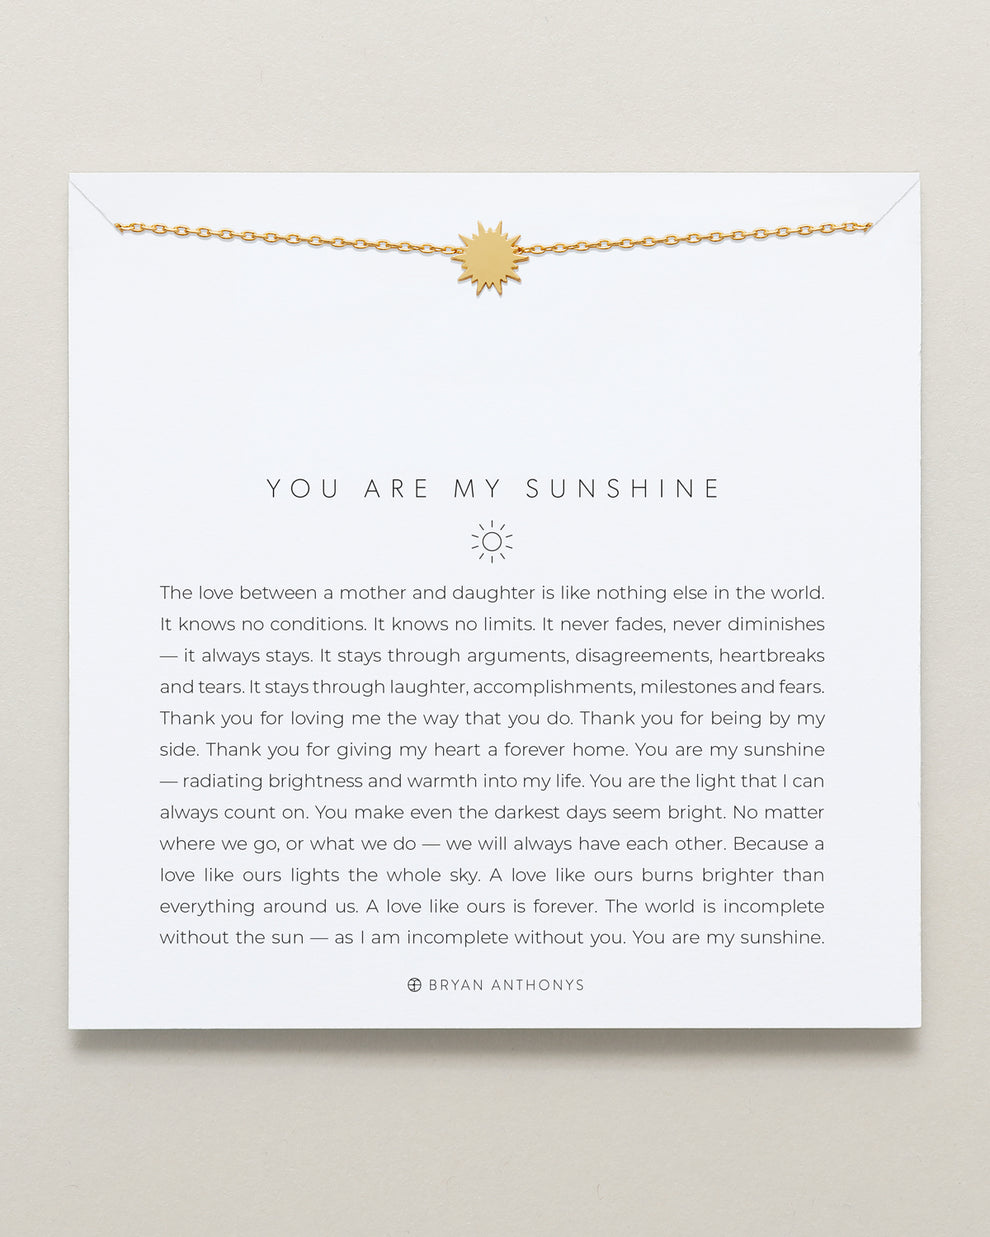 Bryan Anthonys "You Are My Sunshine" Icon Necklace-Gold